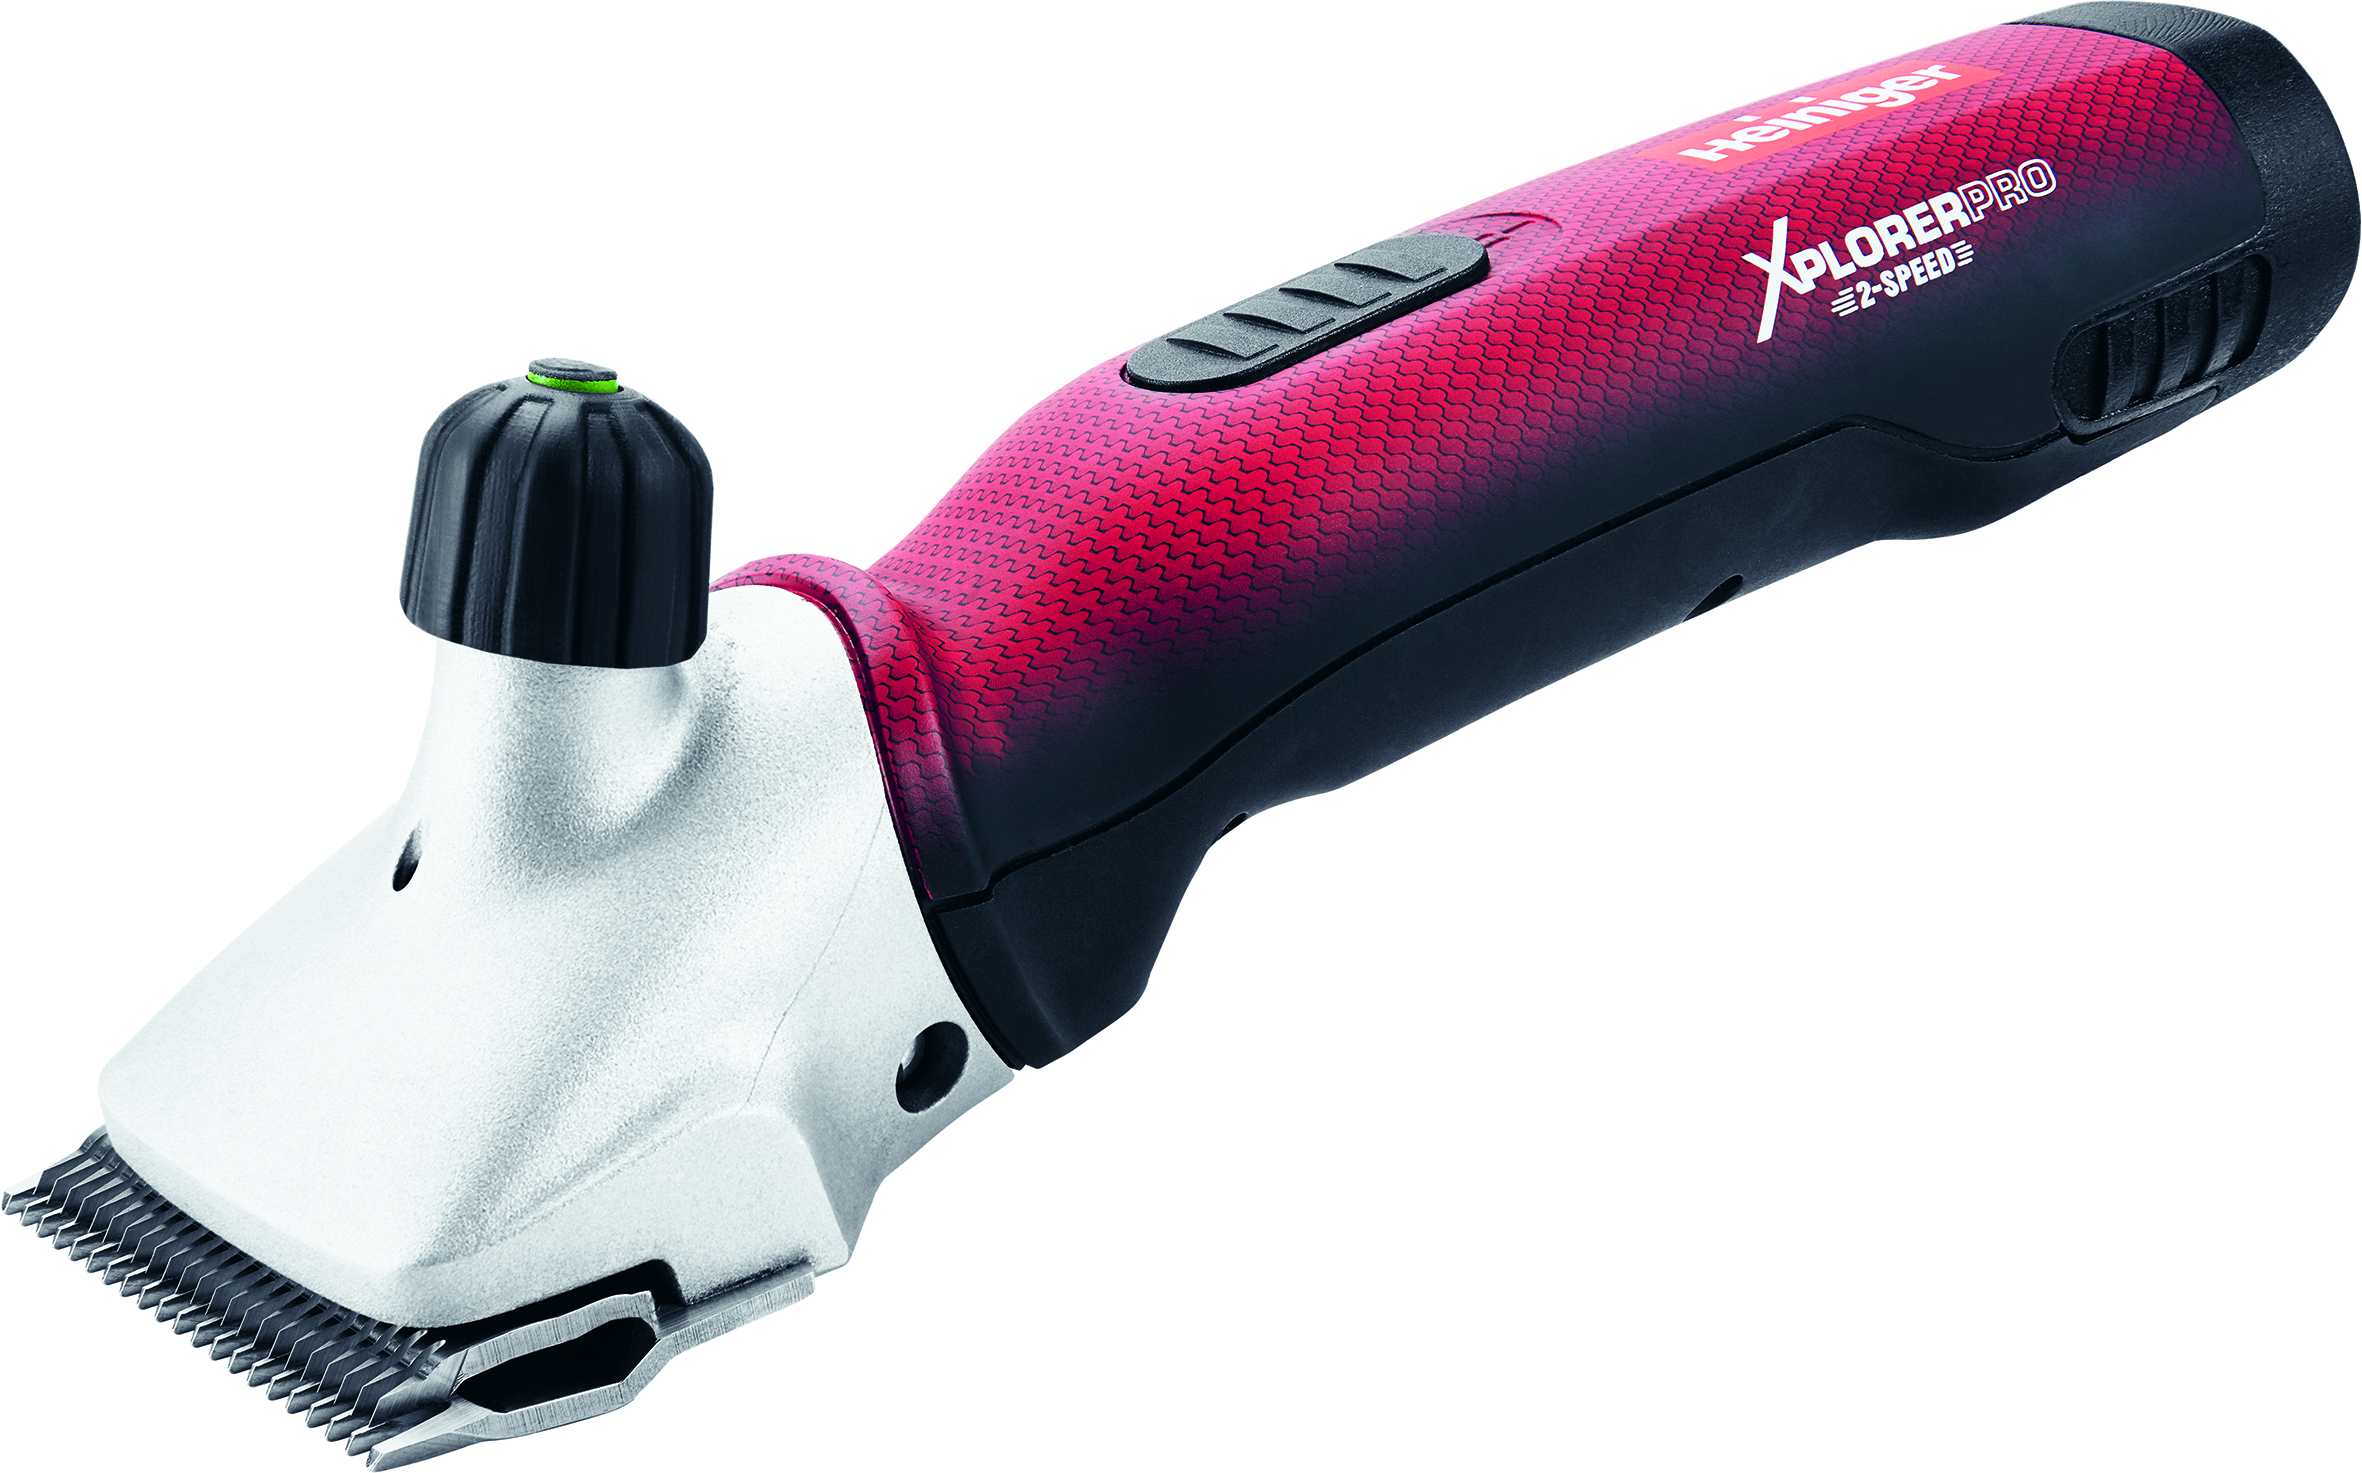 NEW Heiniger Xplorer Pro - the most powerful cordless horse clipper